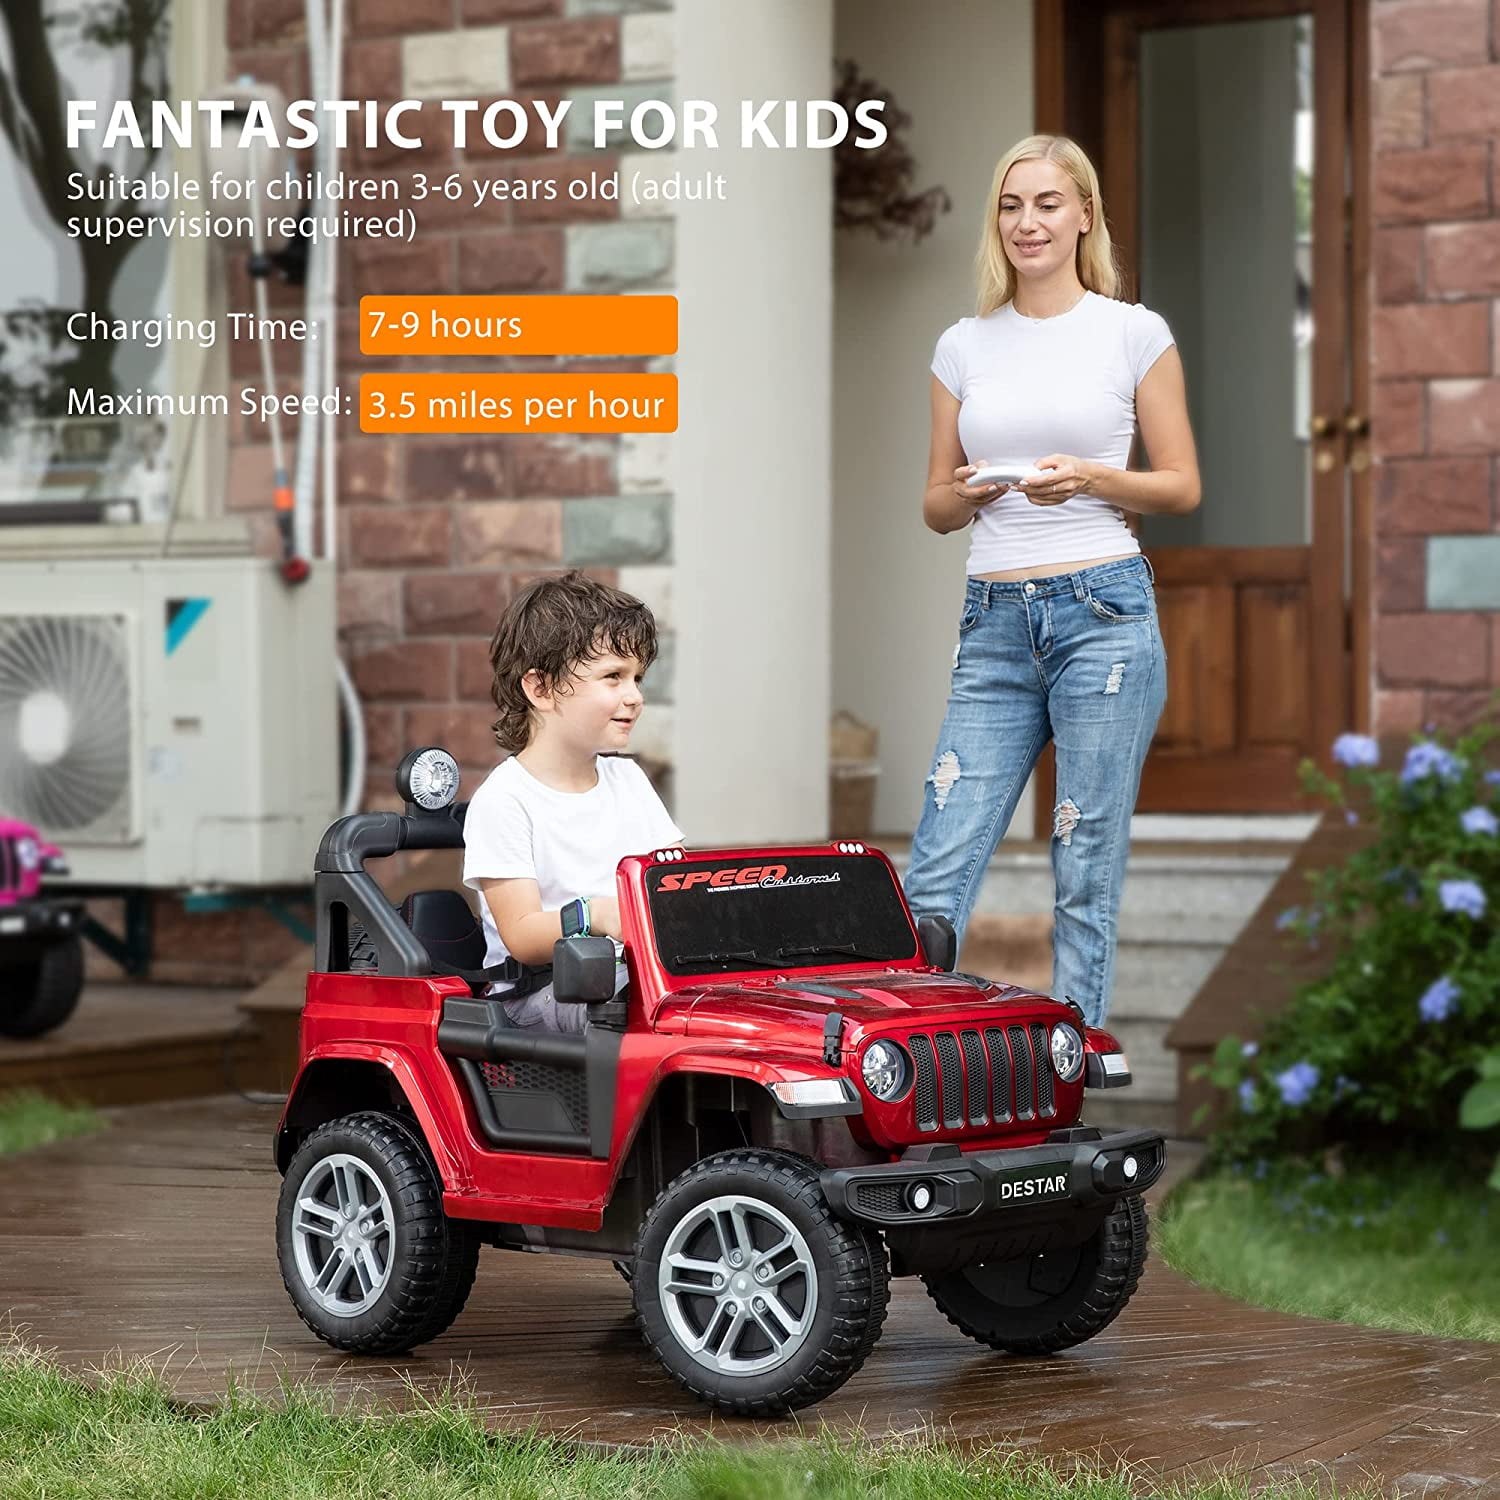 LED Headlights DEStar 12V Ride-on Truck with Parental Remote Control 3 Speeds Red Battery Powered Kids Toy Car with Leather Seaters MP3 Player 